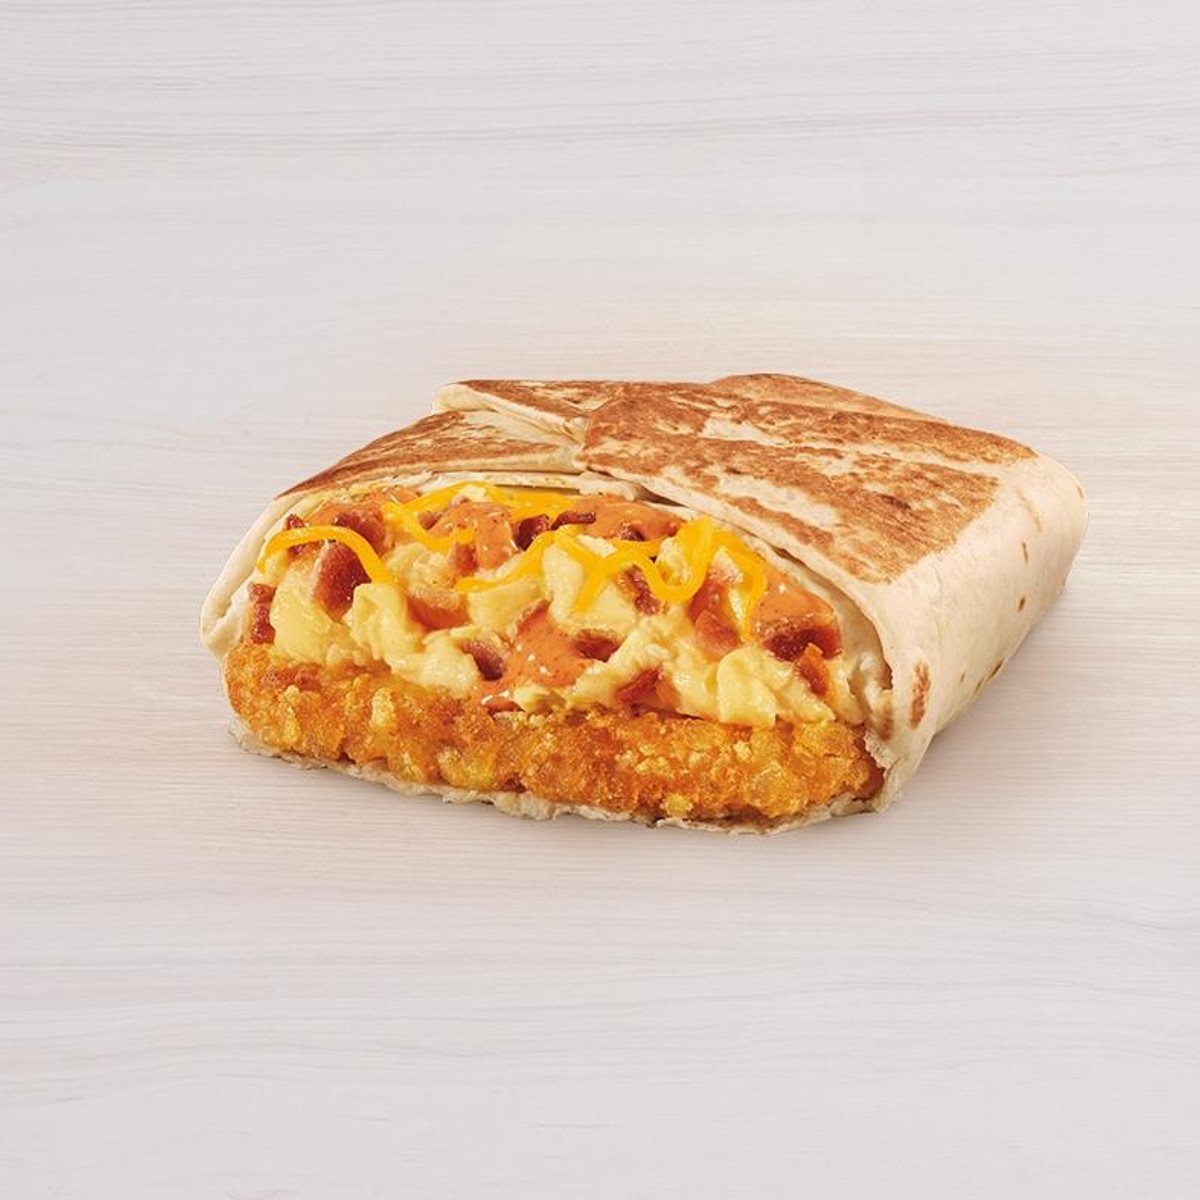 Taco Bell Puts Together New $5 Bell Breakfast Box Alongside New